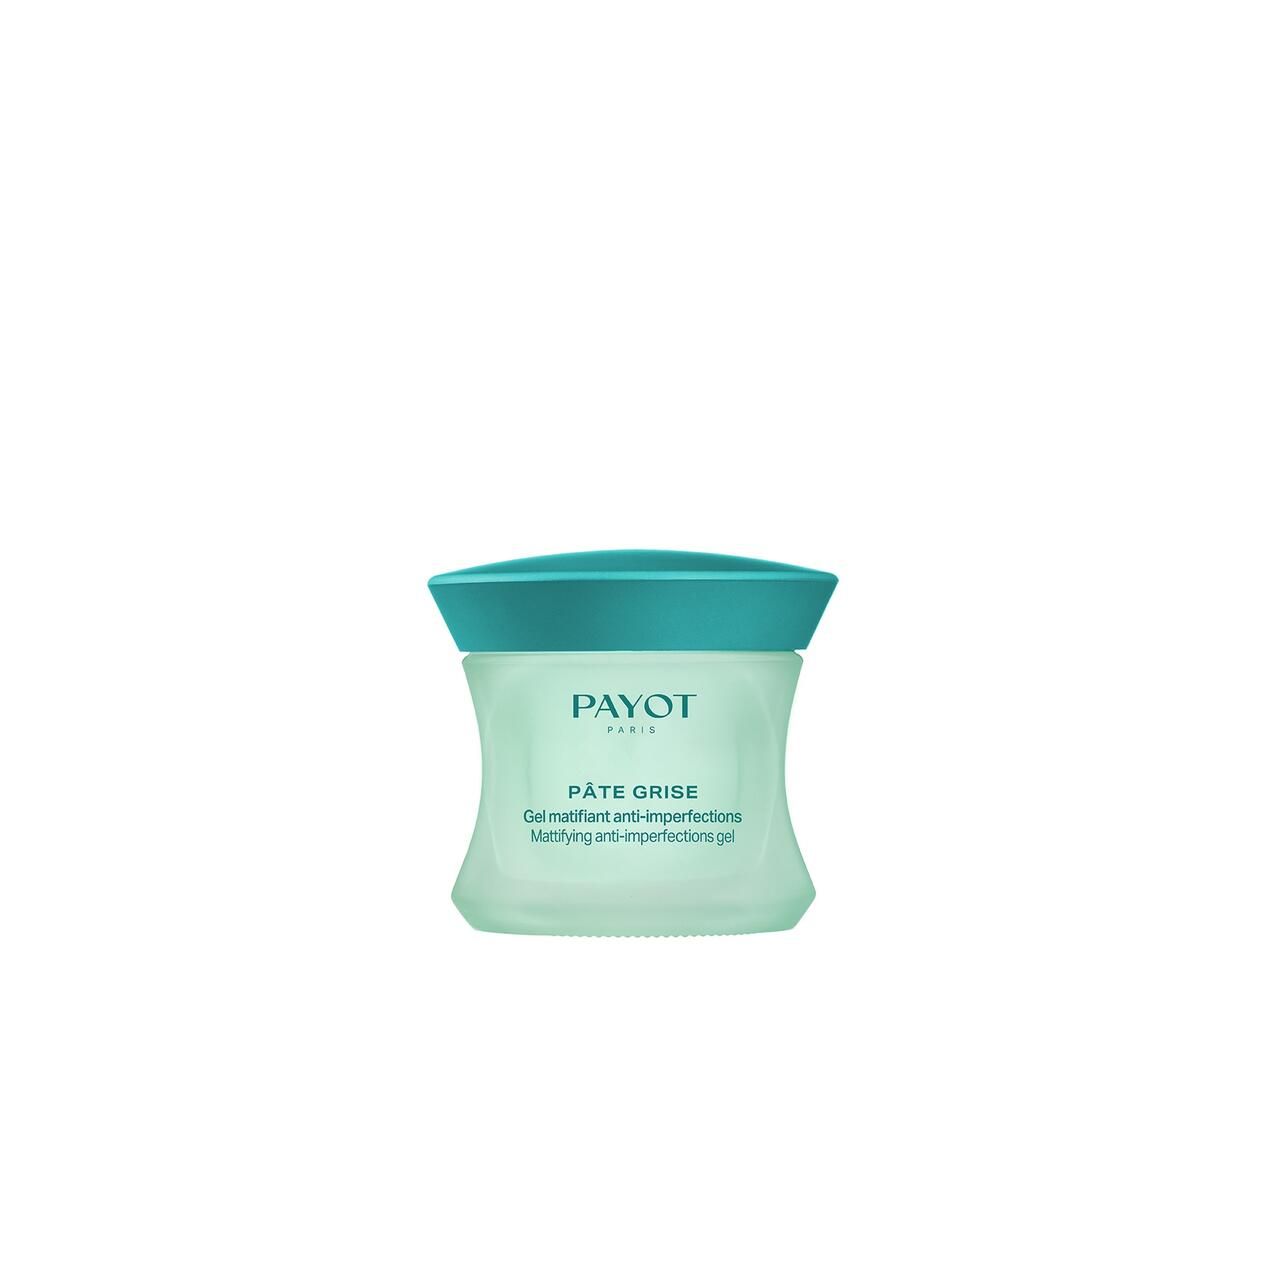 Payot, Pâte Grise Gel Matifiant Anti-Imperections